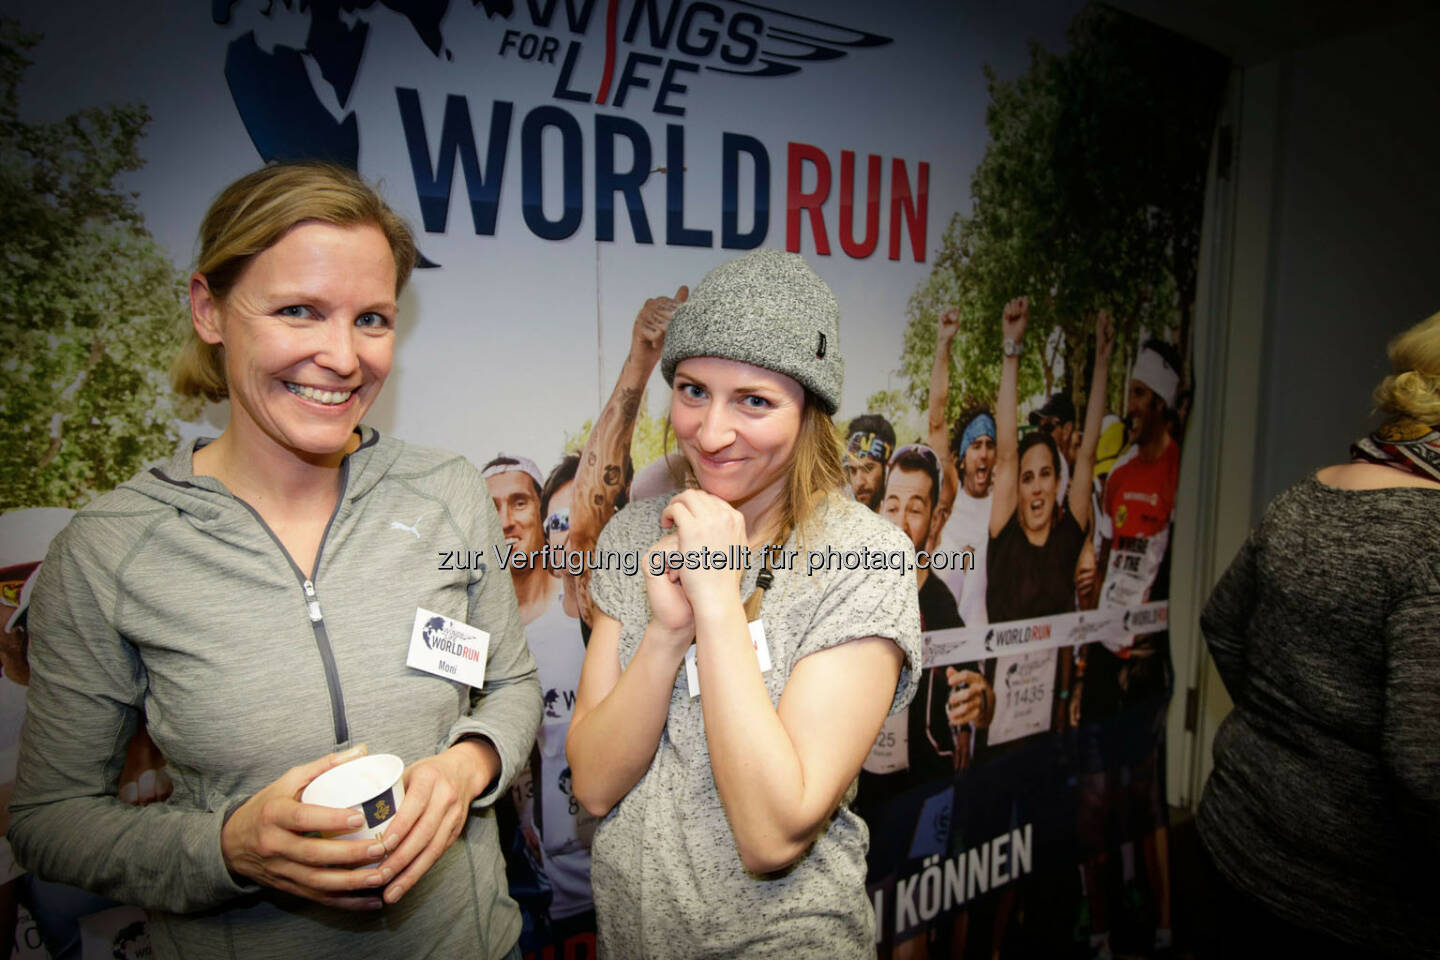 Participants at the Wings for Life World Run event in Munich 23rd of January 2016  (Bild: Daniel Grund)